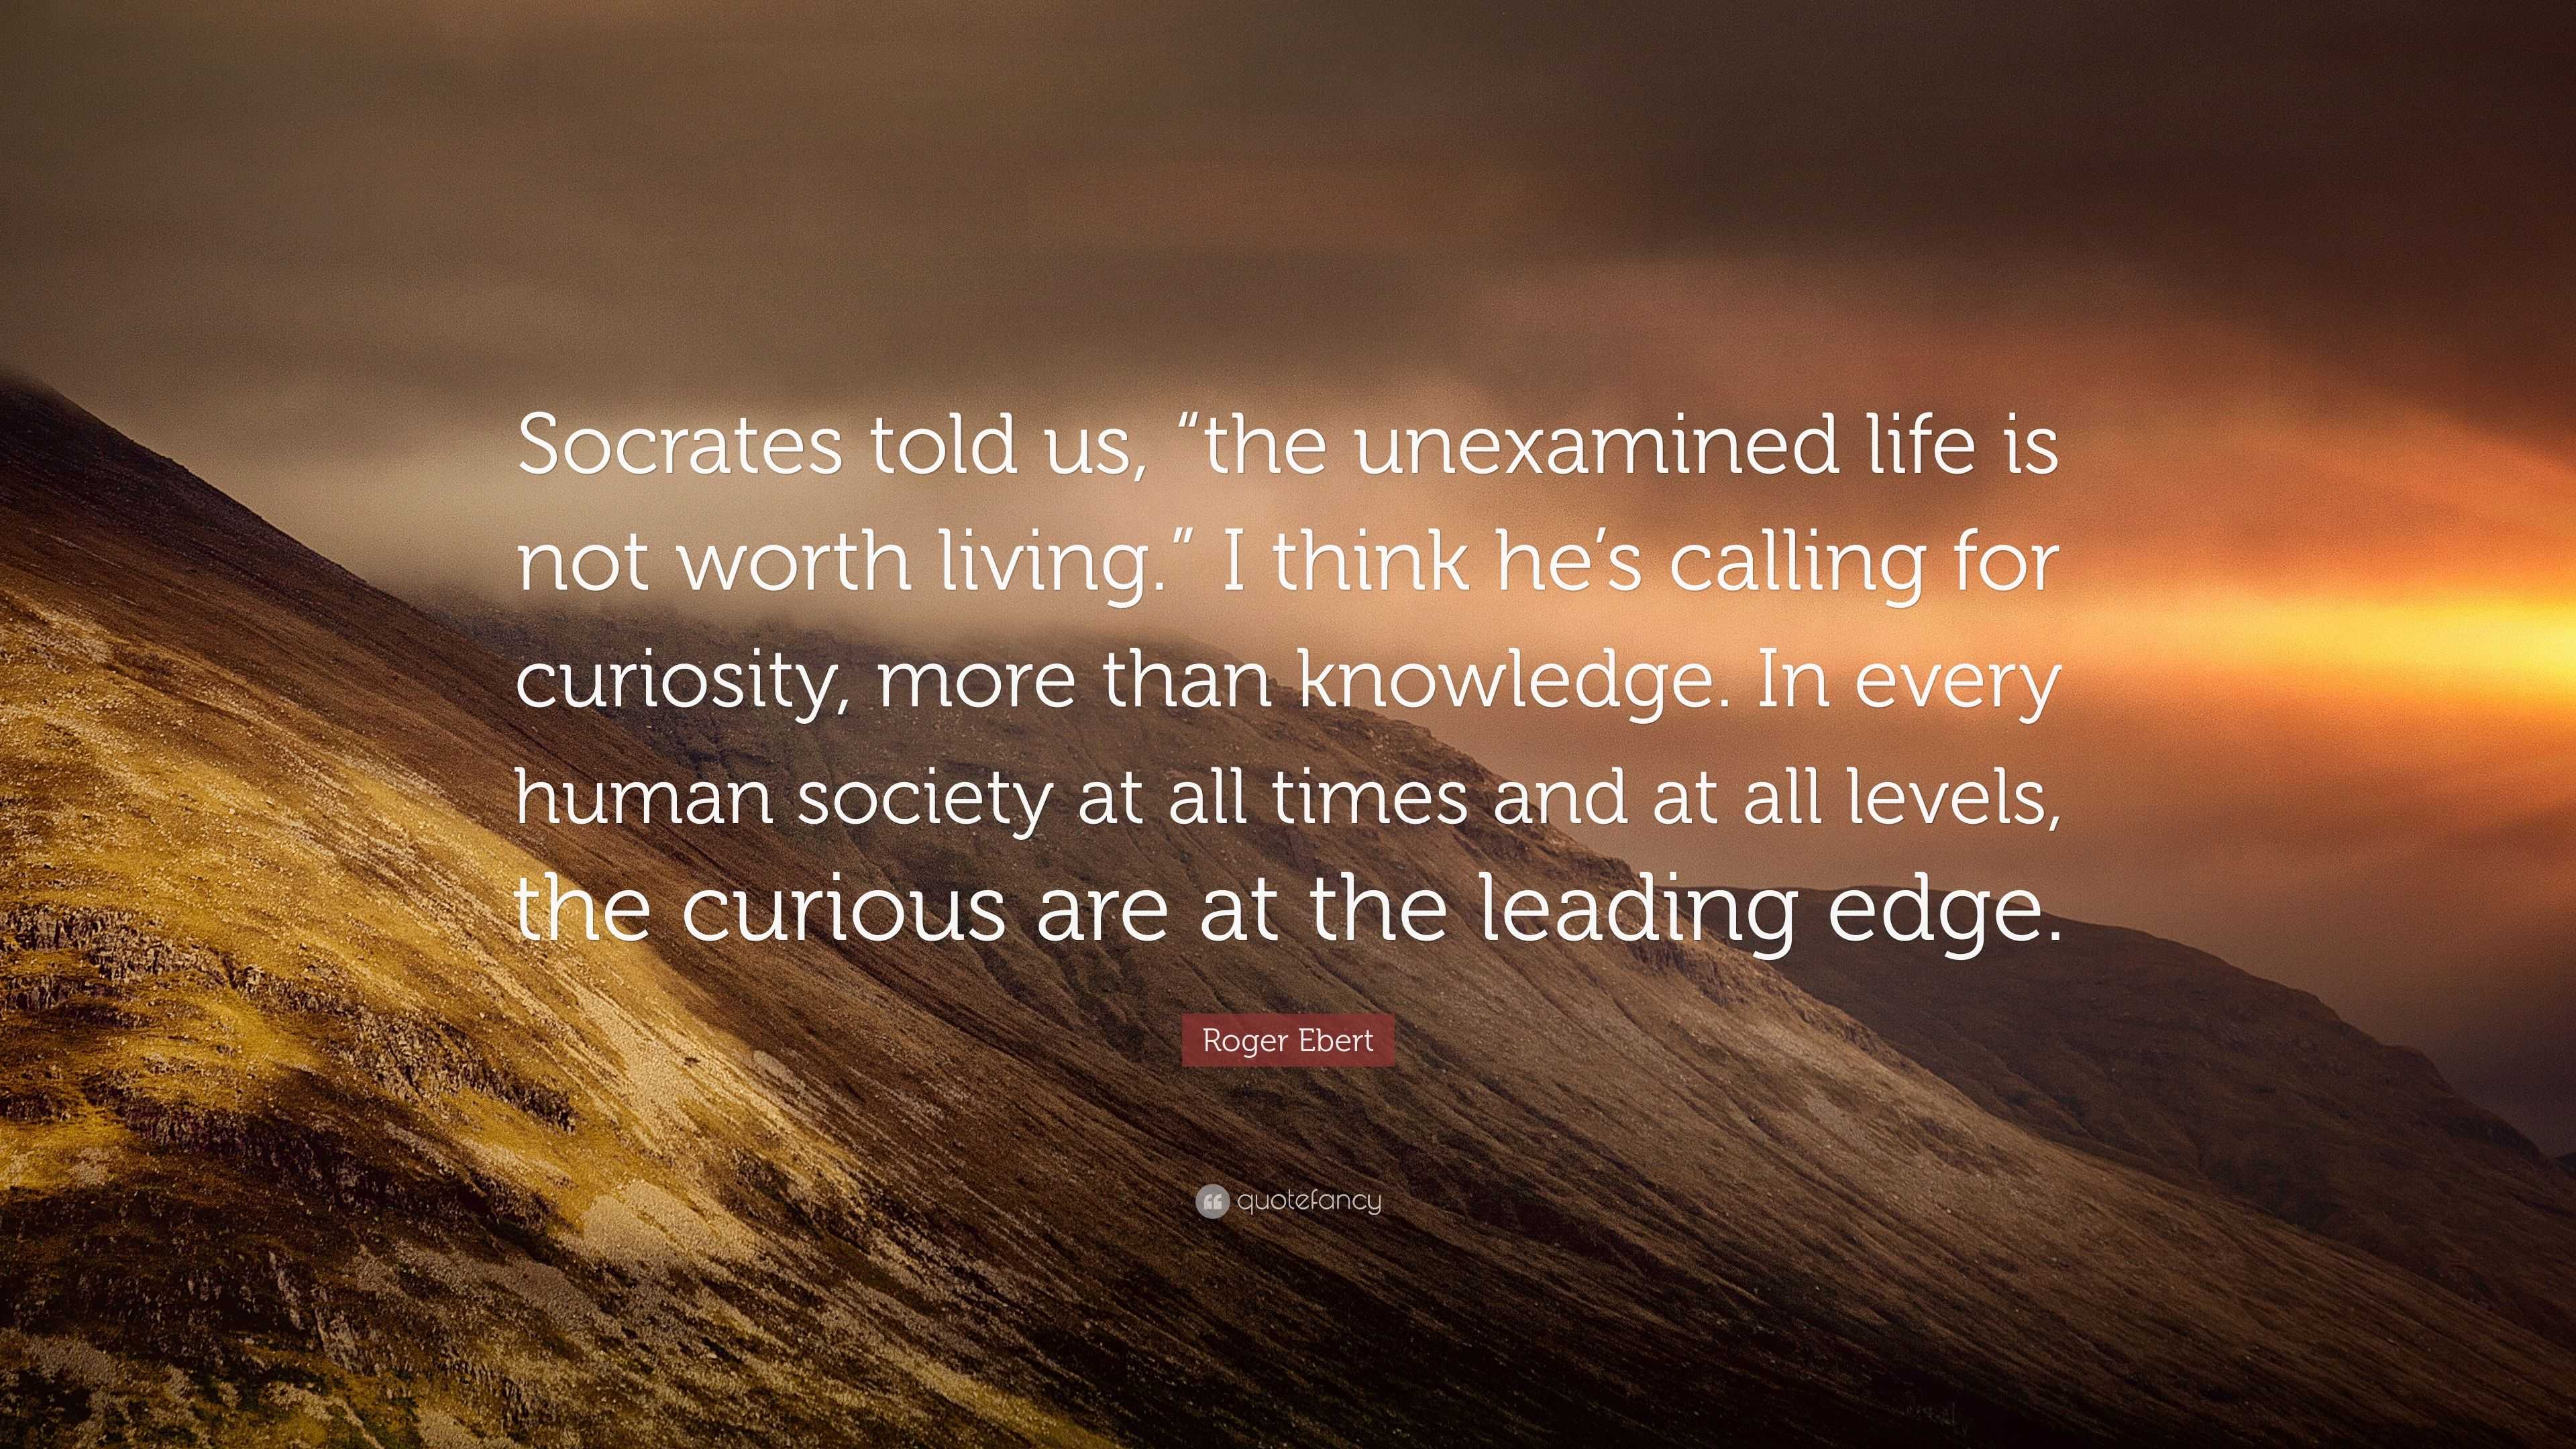 life is worth living quotes roger ebert quote u201csocrates told us u201cthe unexamined life is not